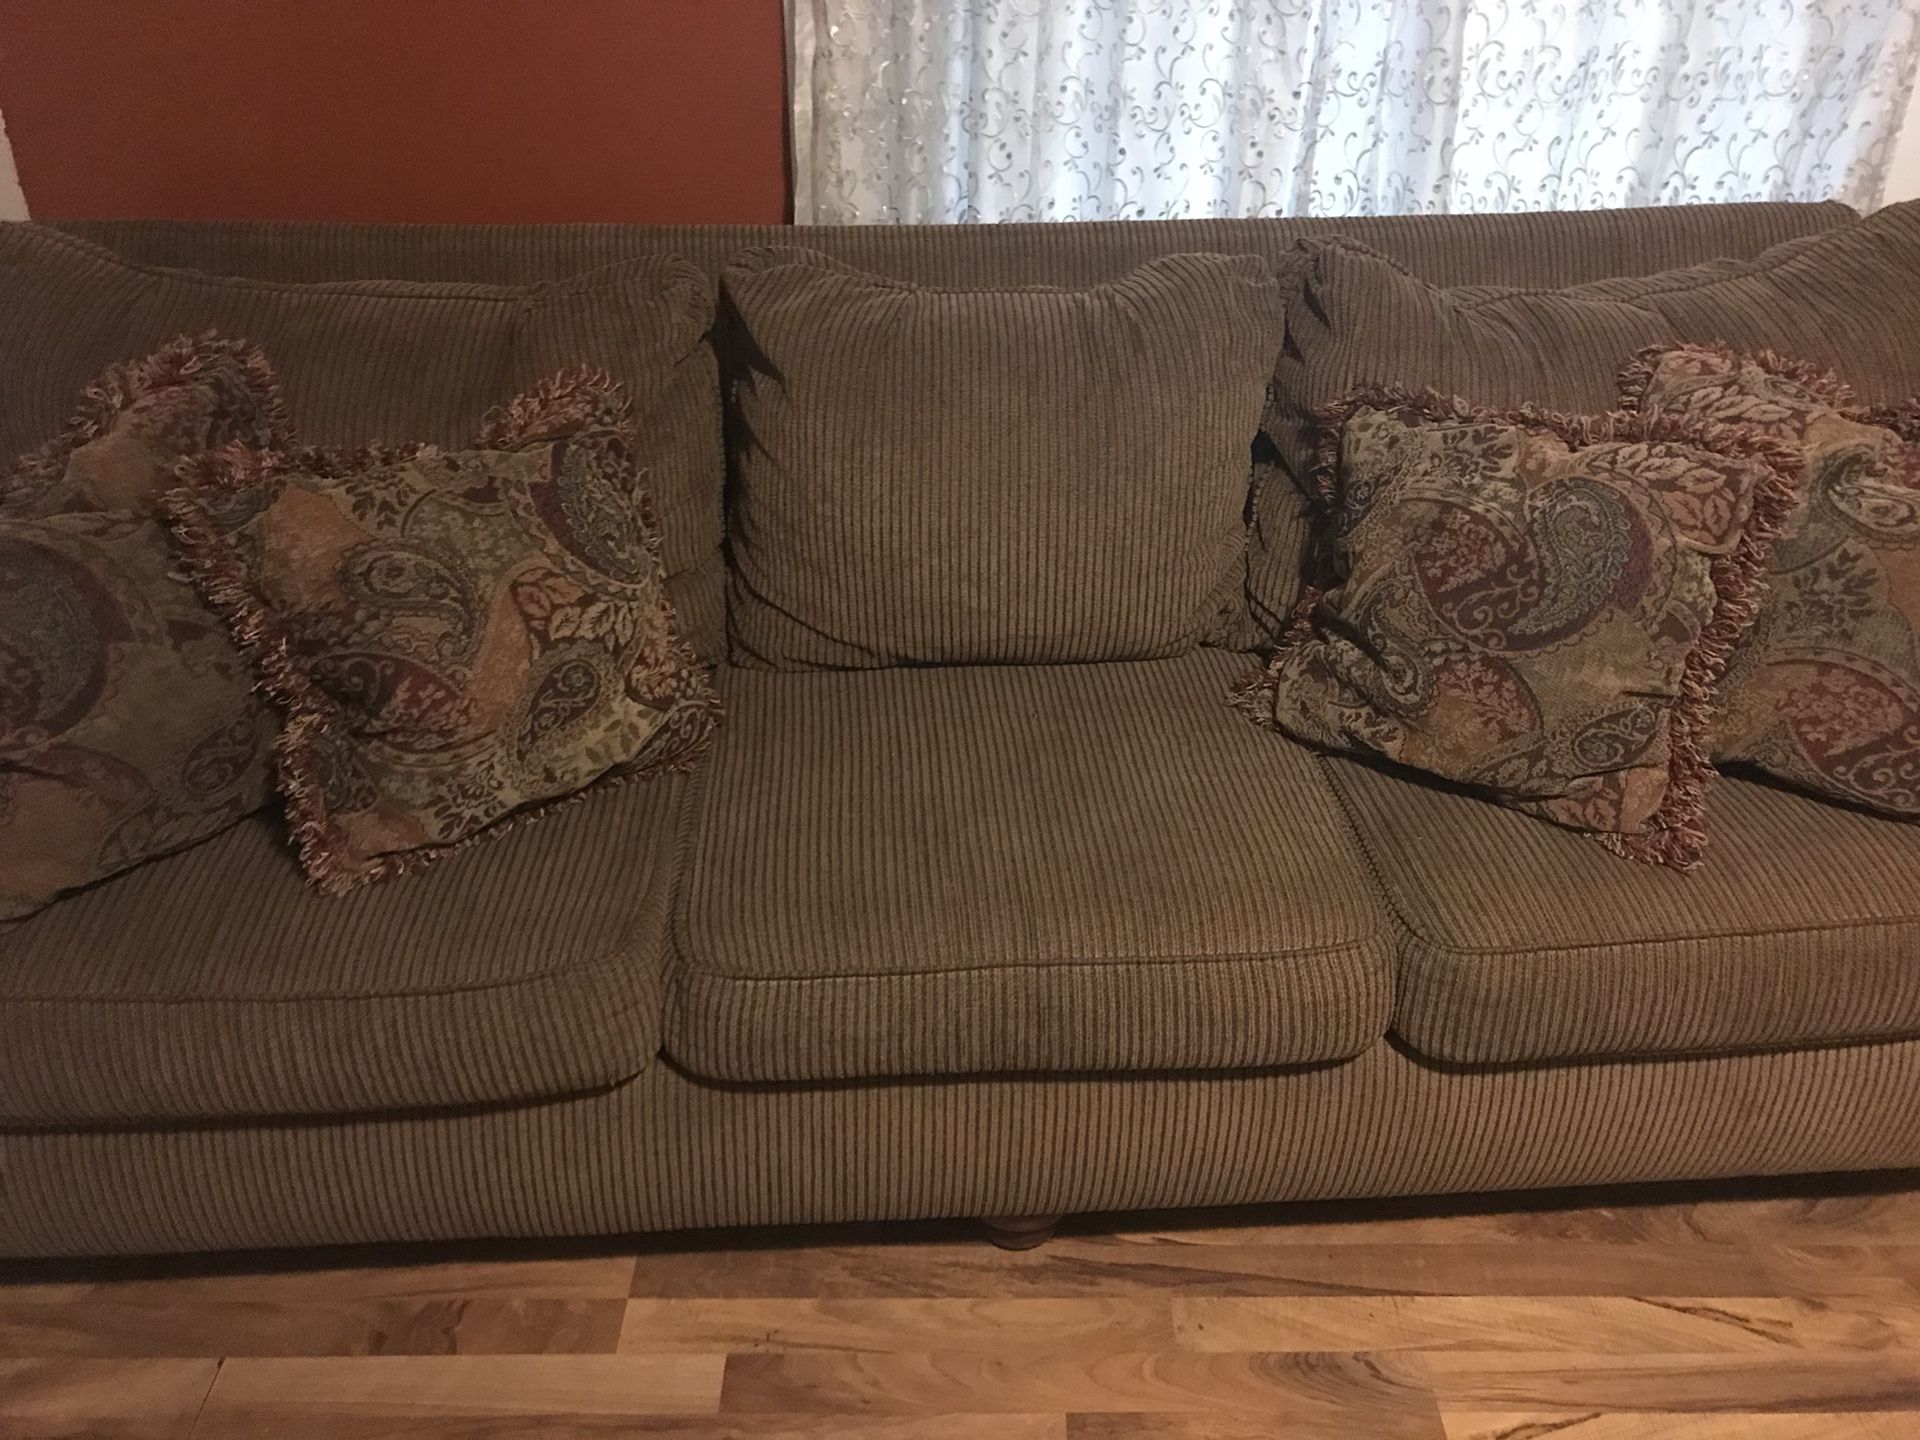 Sofa n loveseat in good condition for $250...pick up only